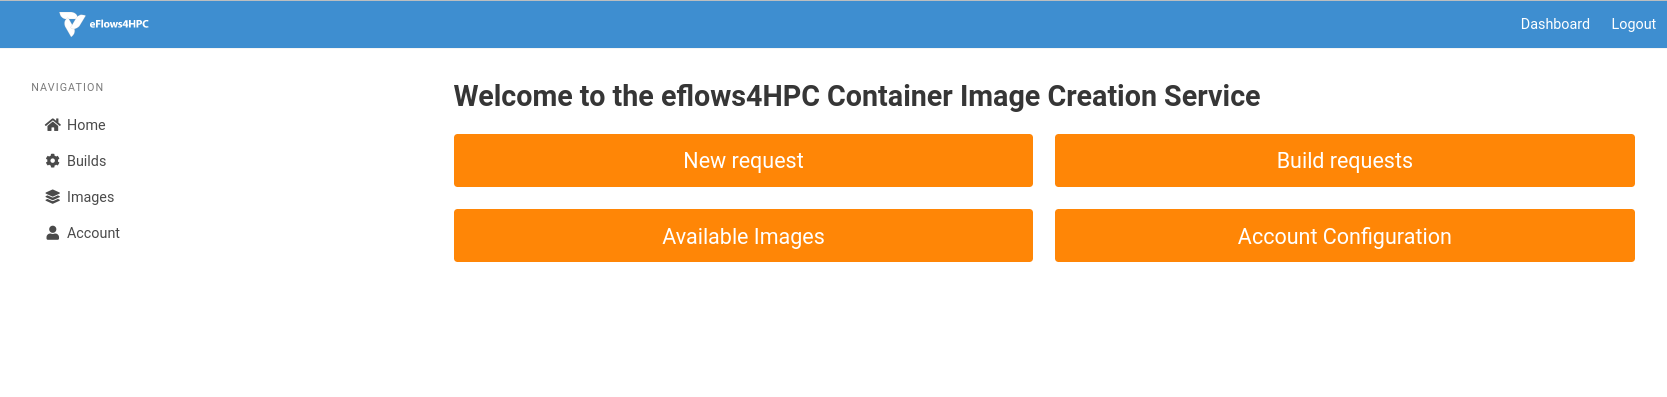 Container Image Creation Service home page